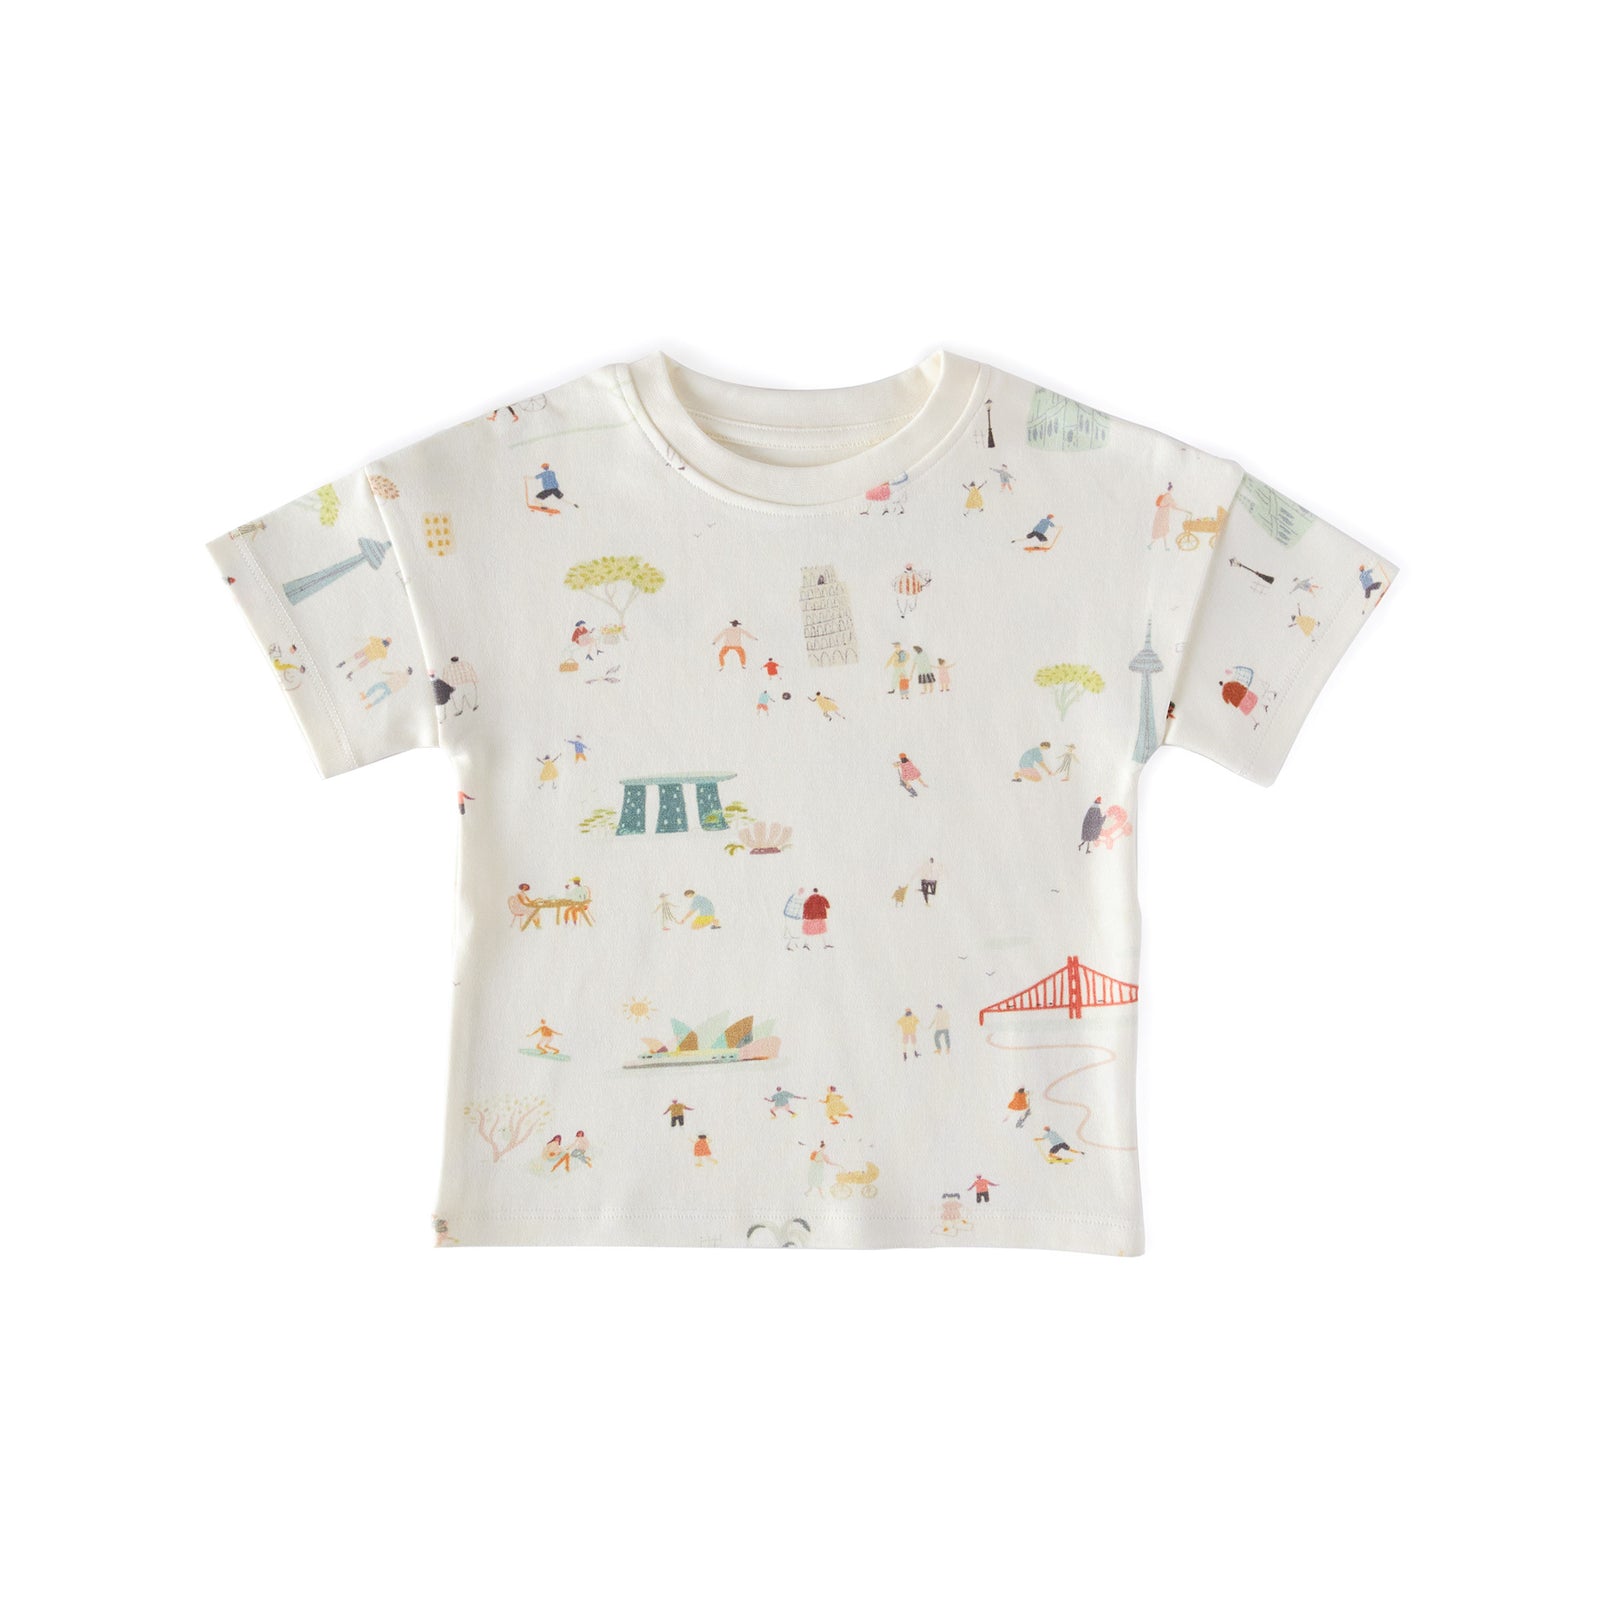 Dropped Shoulder T-Shirt Top Pehr Canada Explore the World 18 - 24 mos. 